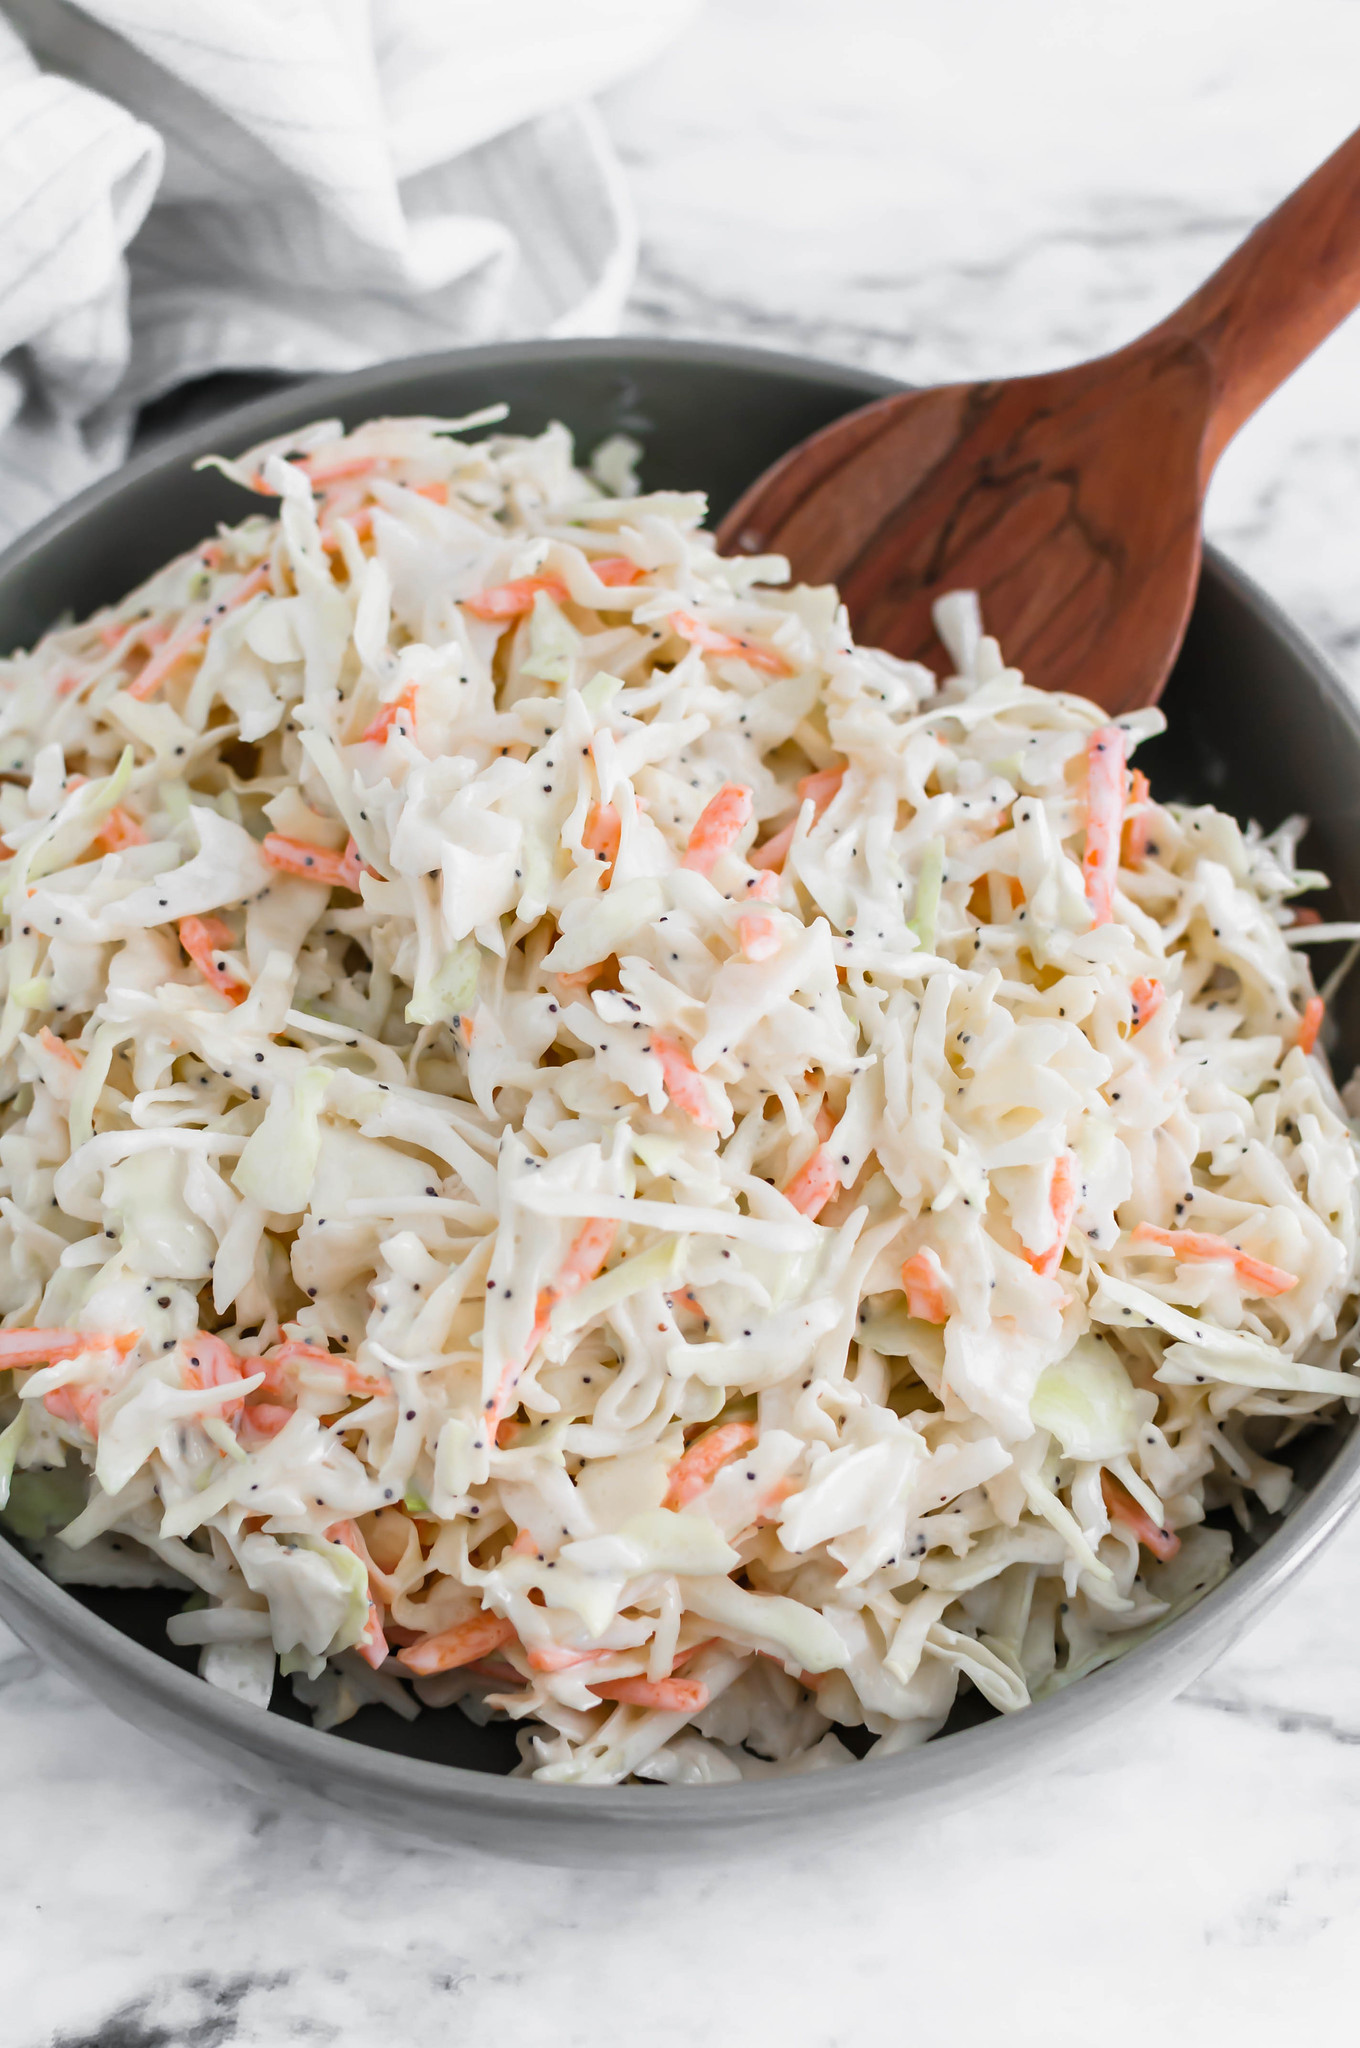 This Creamy Coleslaw is perfect for weeknights, holidays, potlucks and so much more. Made with coleslaw mix and pantry and refrigerator staples.